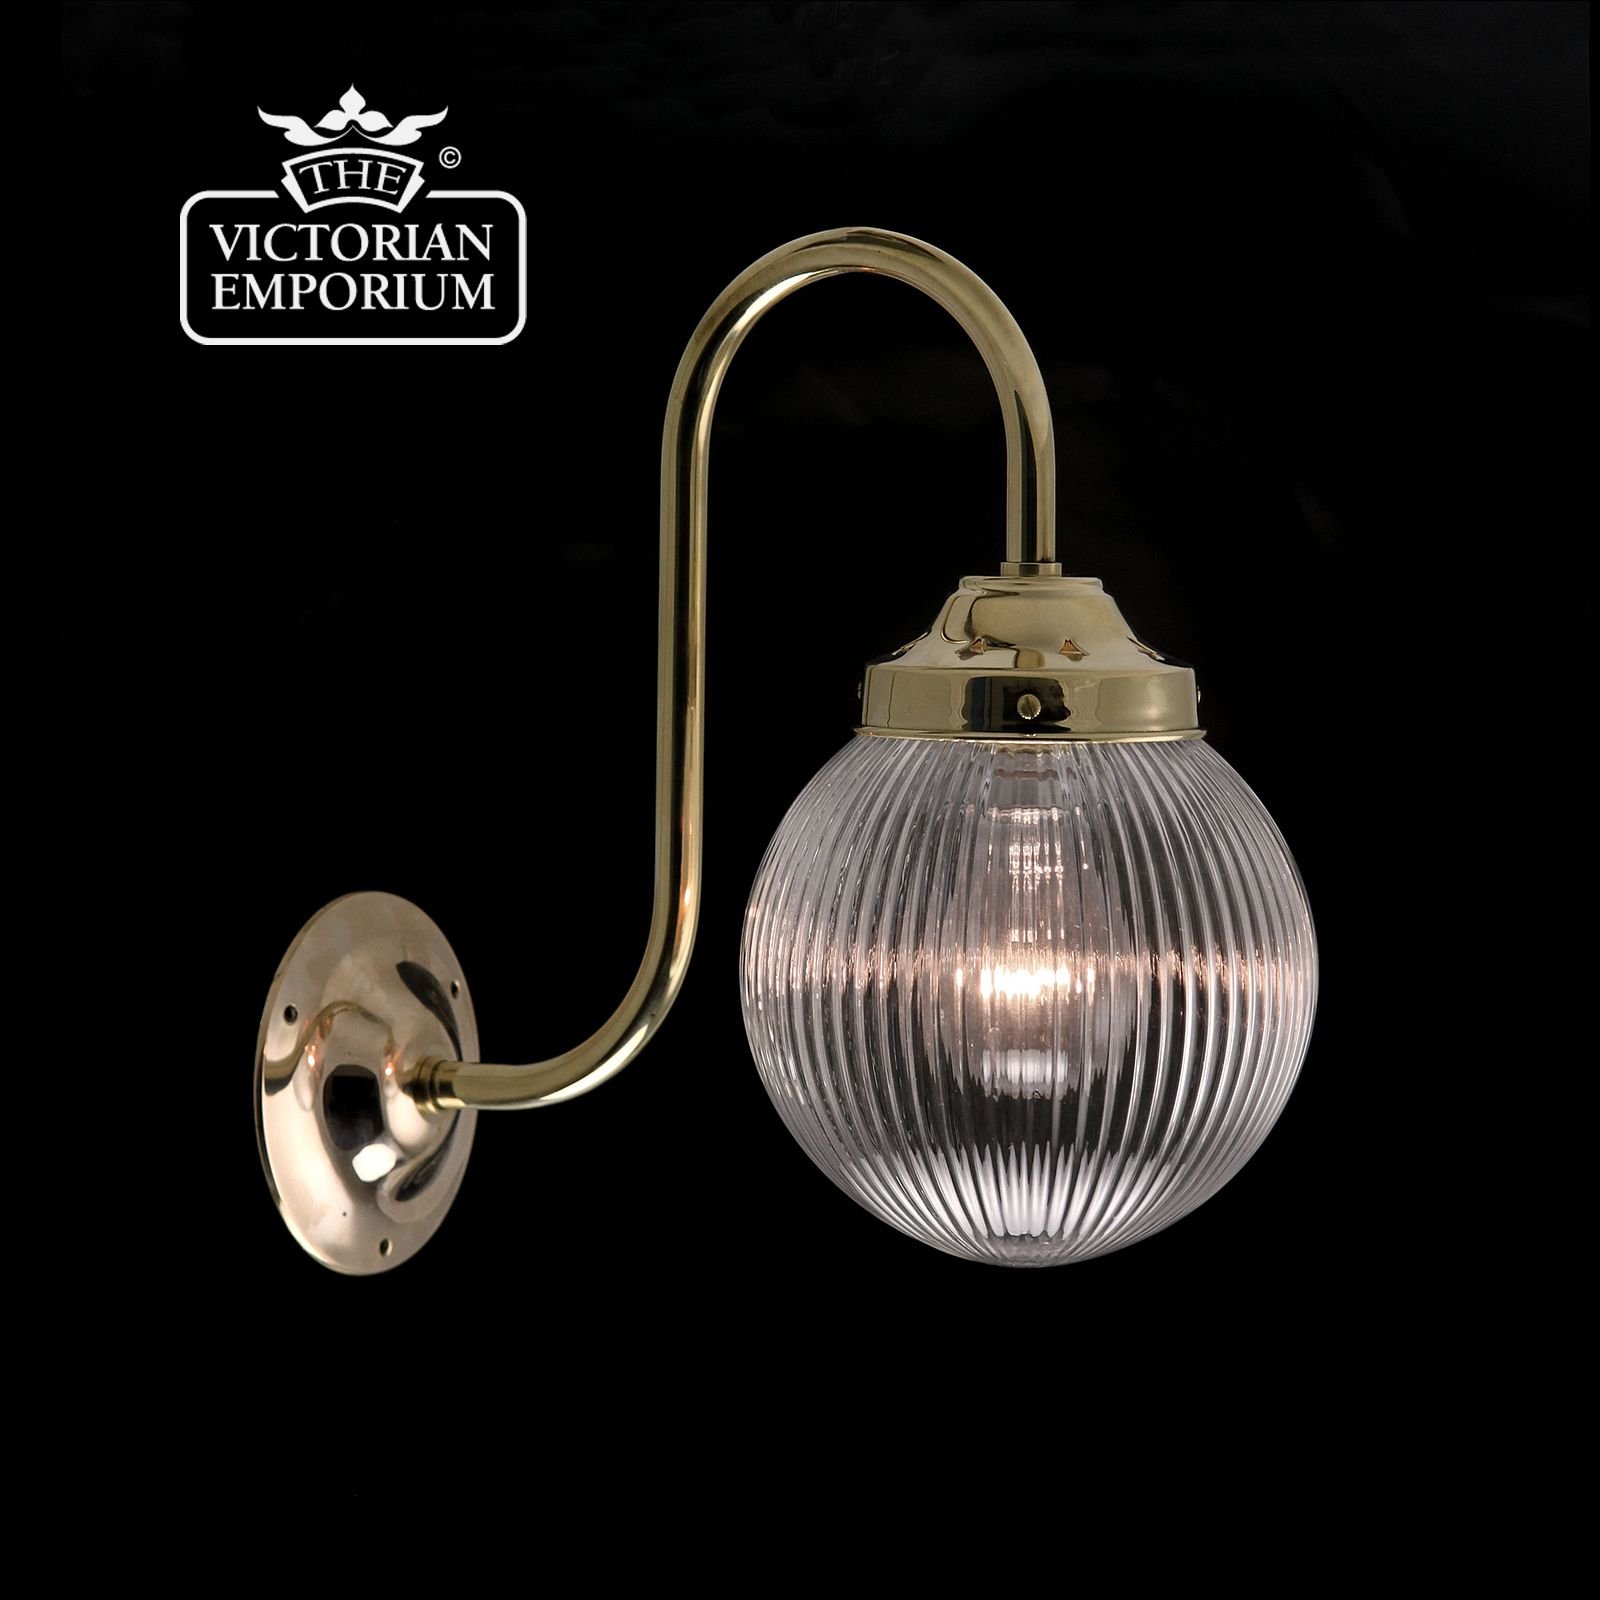 Single globe wall light with reeded glass